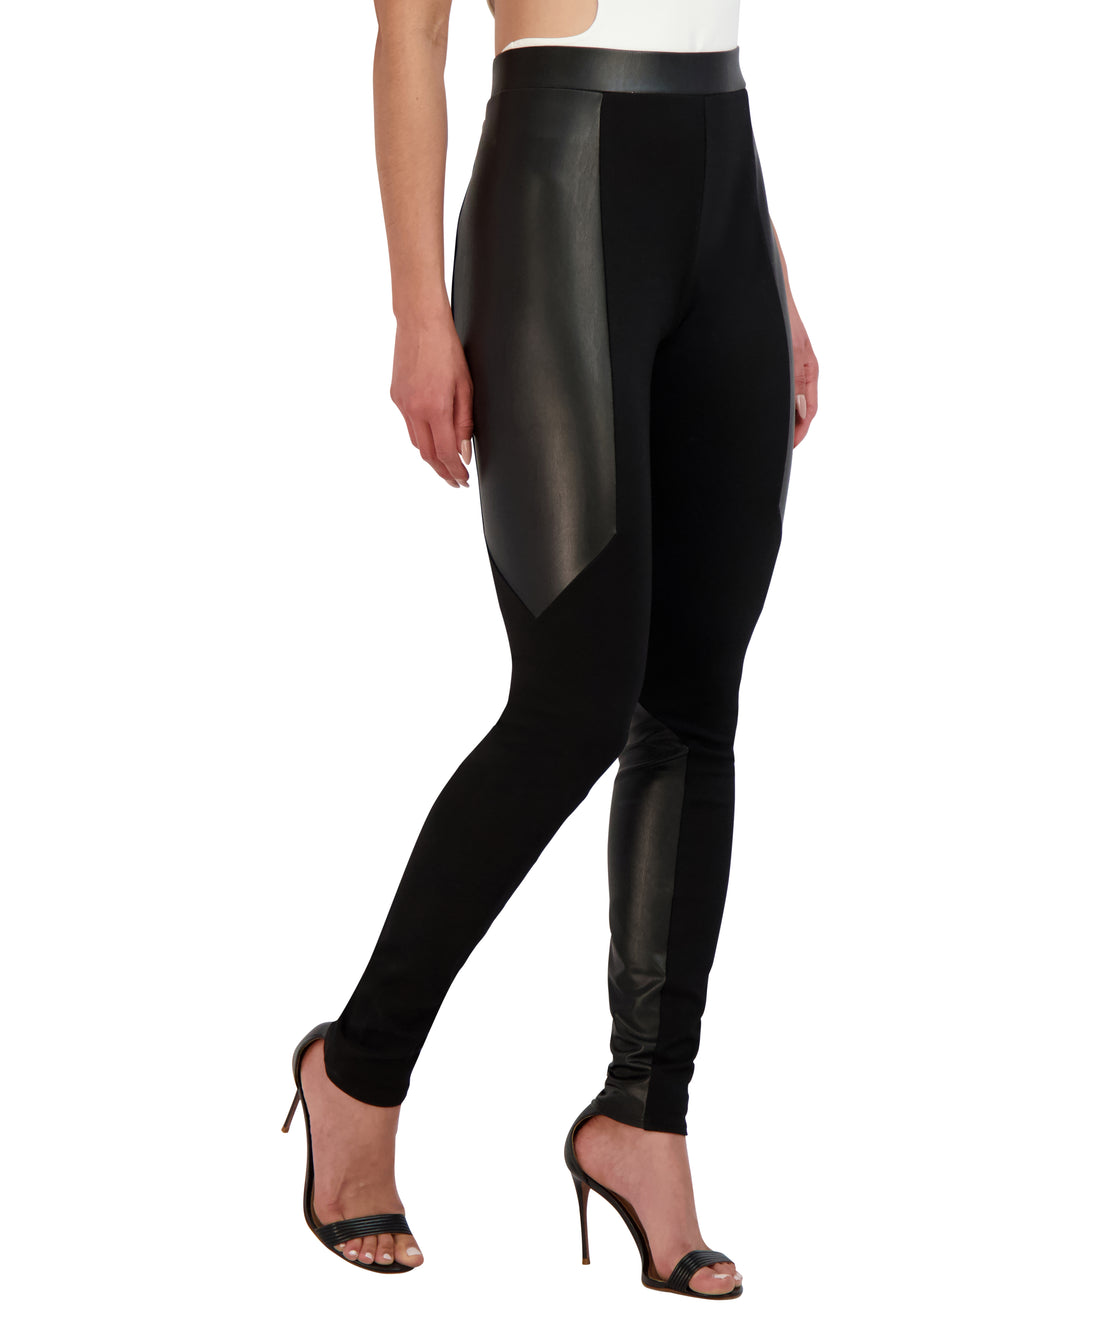 Black Leggings With Faux Leather Patch Work